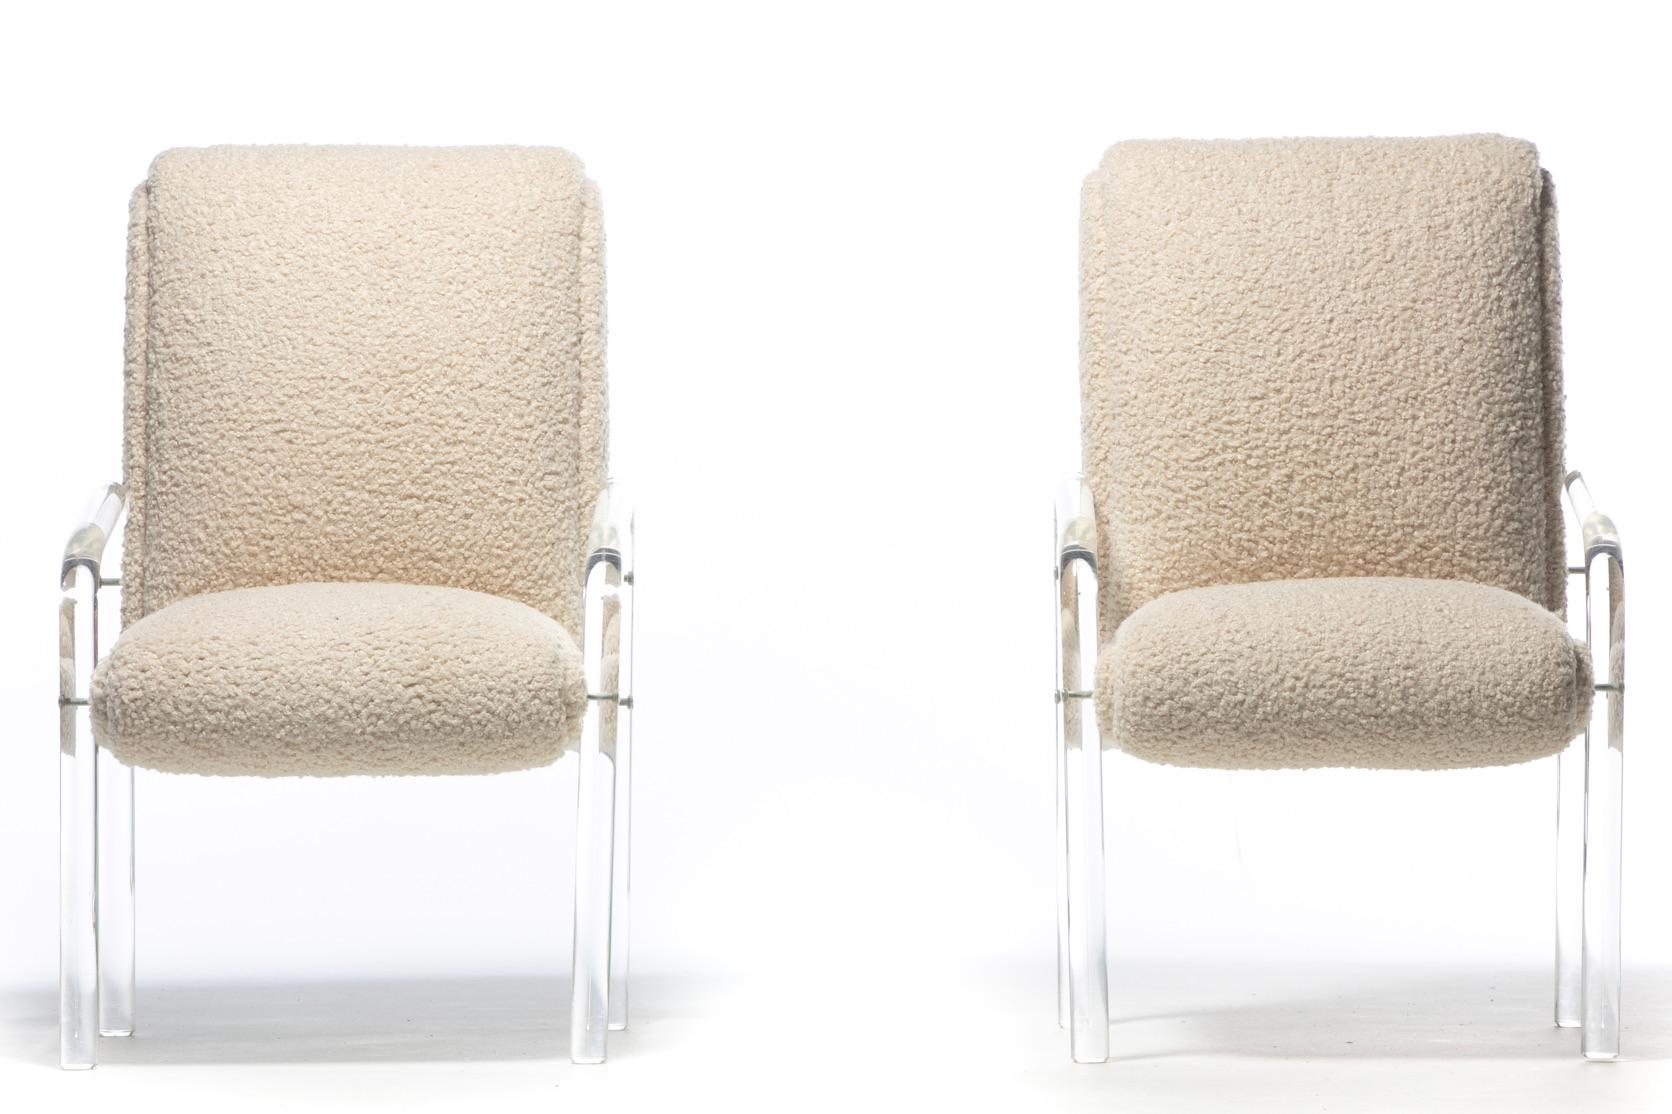 Sexy pair of 1970s lucite arm chairs designed by Leon Rosen for Pace. Sculptural. Clean neutral look endeavors feelings of light and air. Angled lucite arm rests and legs. Wide and comfortable seat. Incorporate well as side chairs into most styles